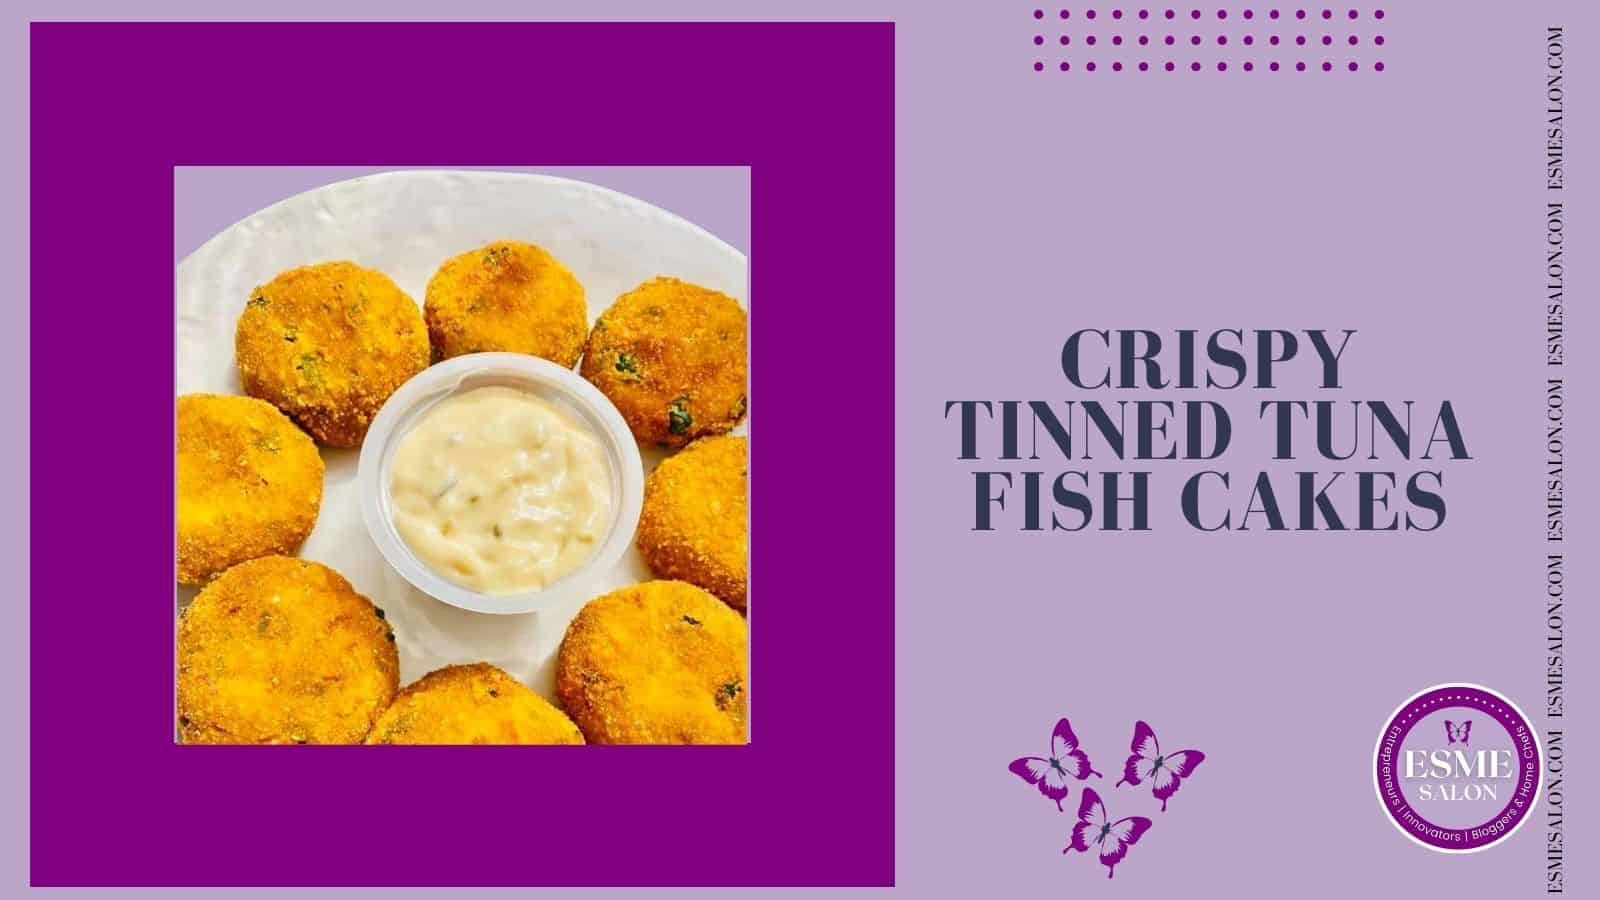 Plate with Crispy Tinned Tuna Fish Cakes with a dip in the middle